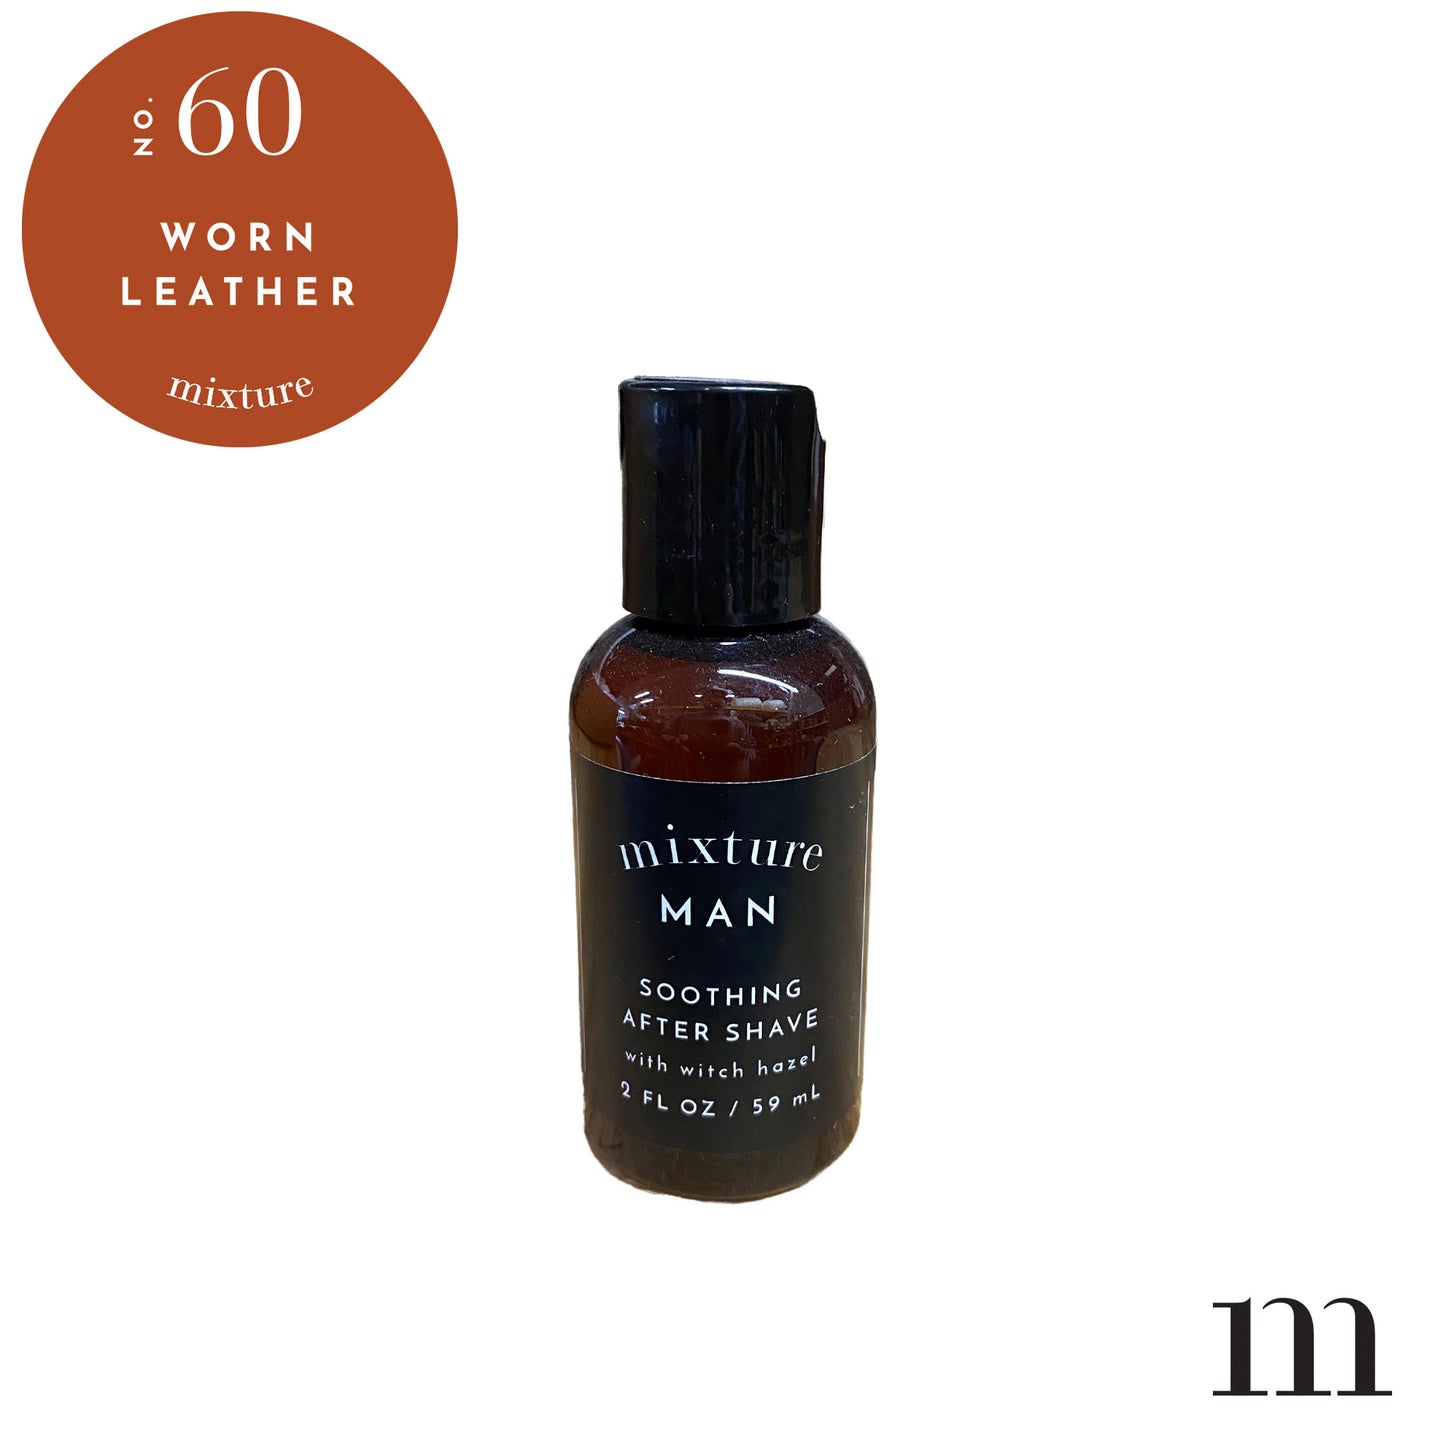 2oz Mixture Man After Shave - Worn Leather